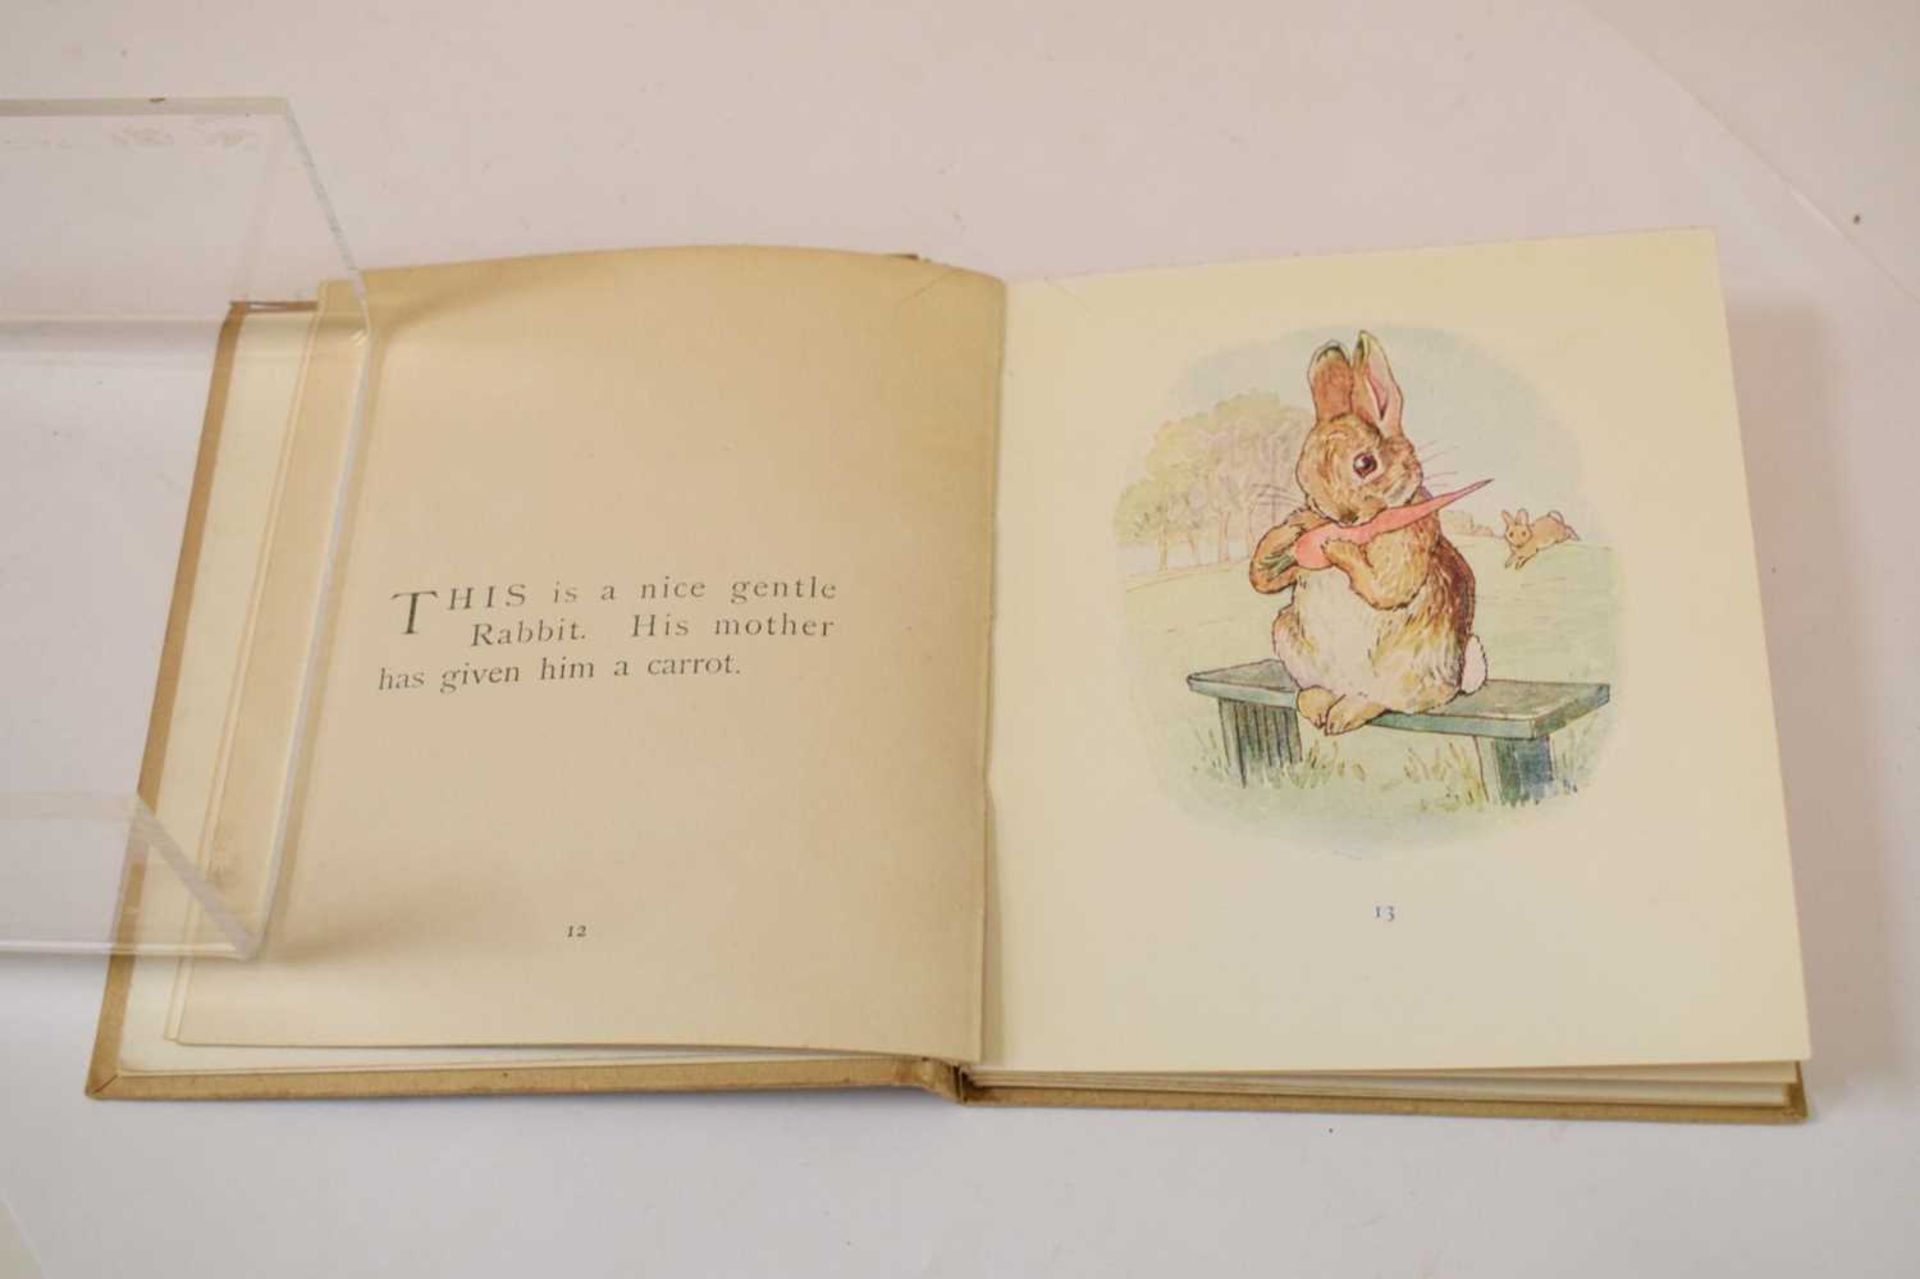 Potter, Beatrix - 'The Story of A Fierce Bad Rabbit' - First Edition - Image 11 of 20